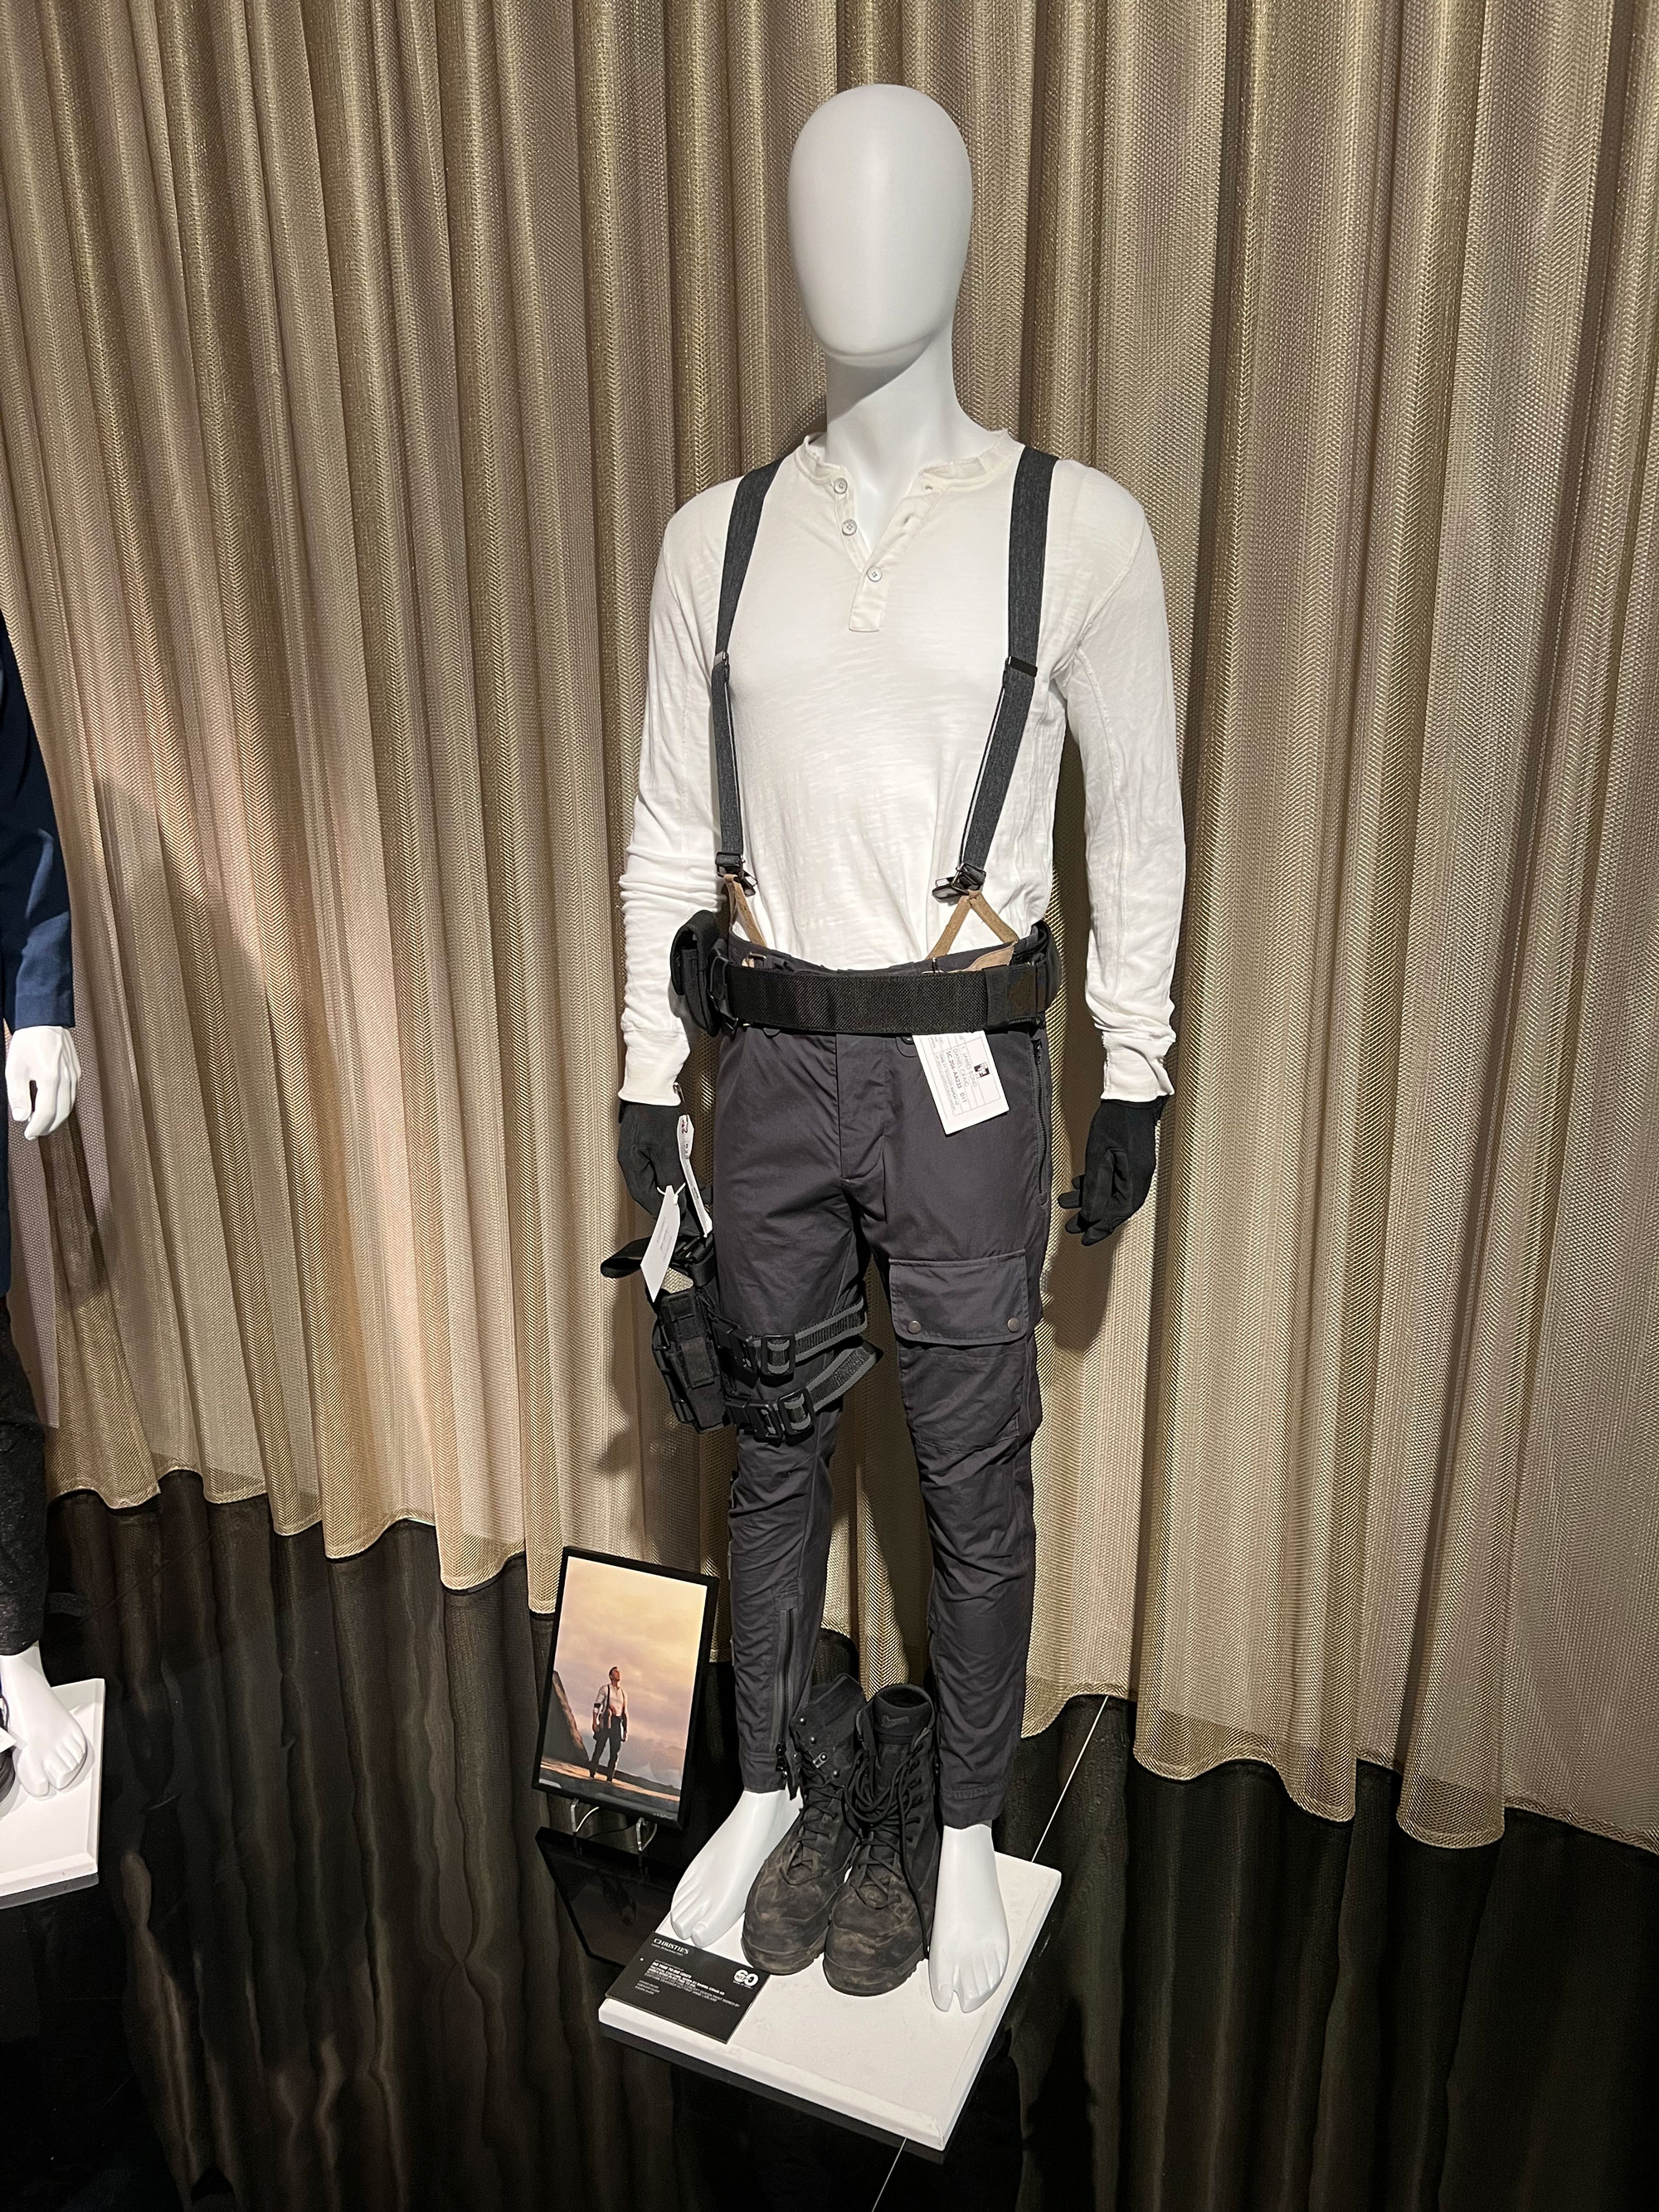 Bond's final outfit from No Time To Die